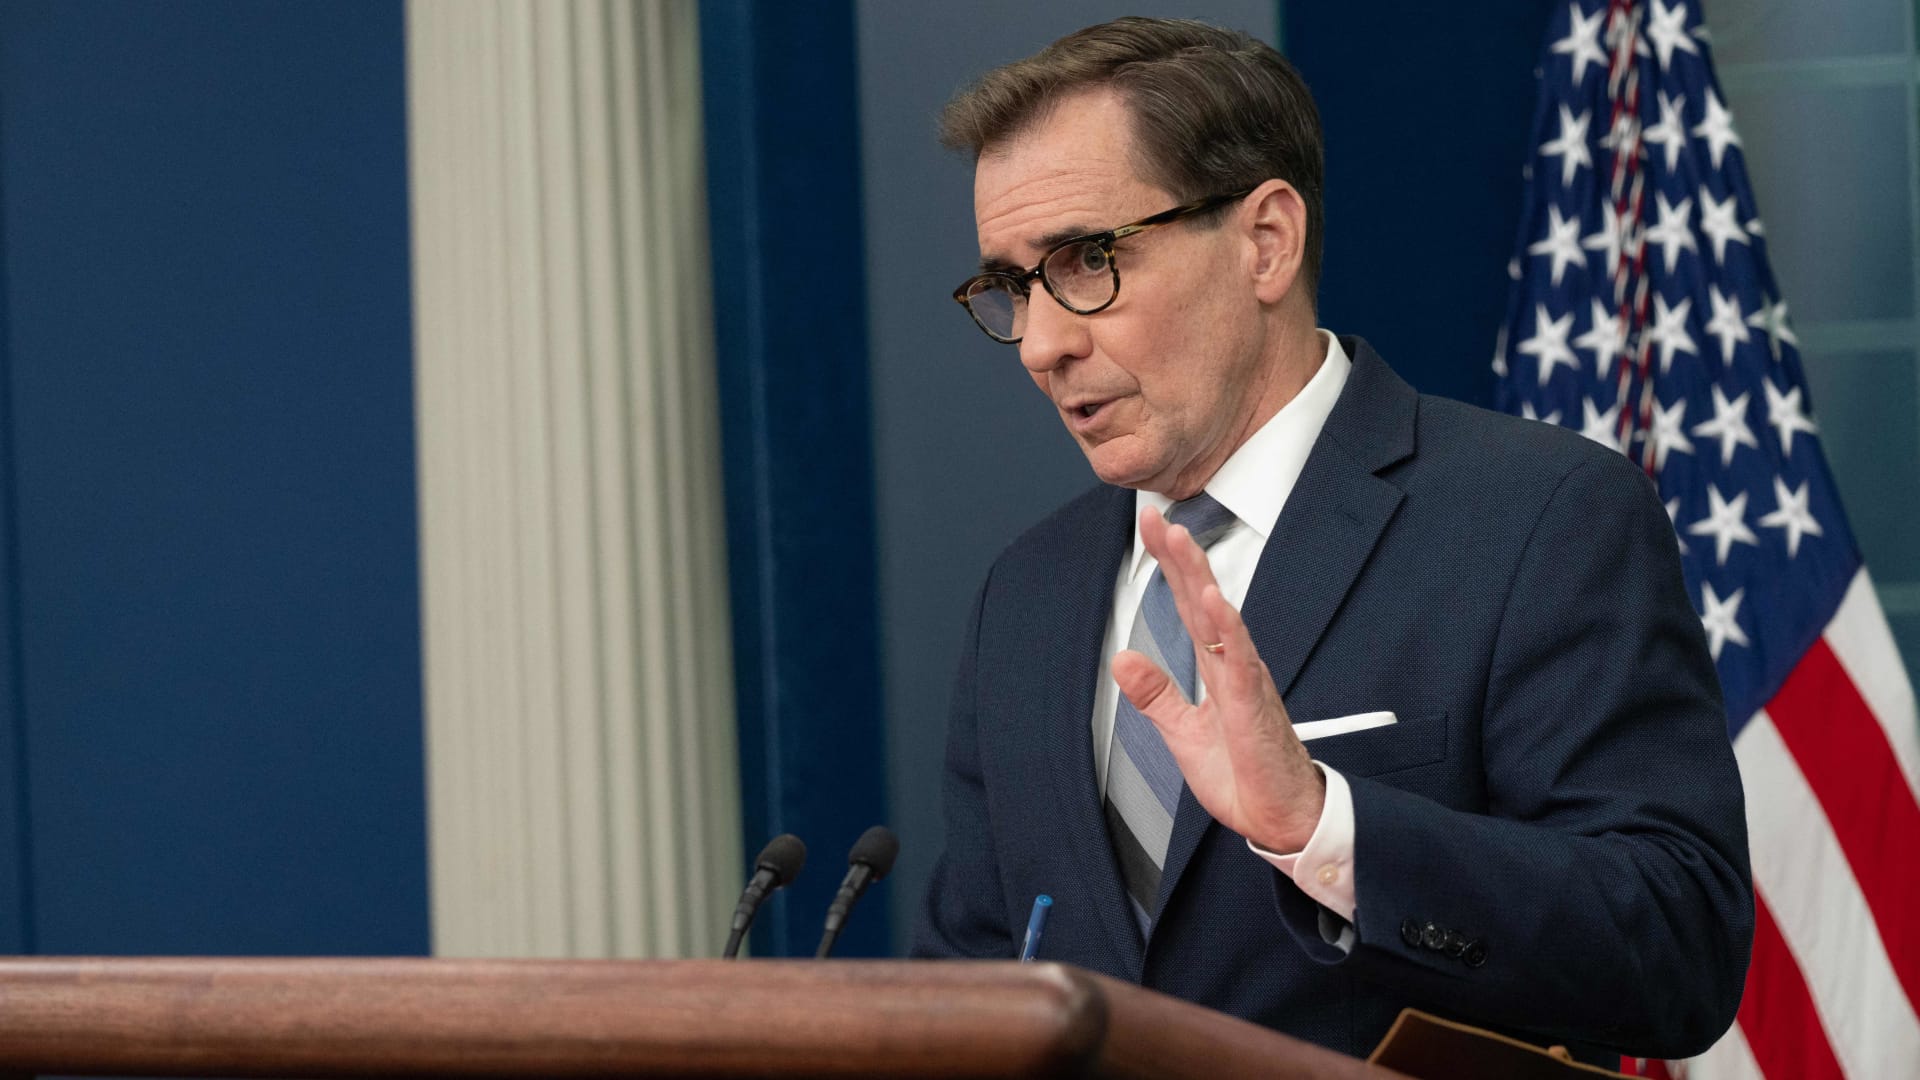 Coordinator for Strategic Communications at the National Security Council John Kirby speaks during the daily briefing in the Brady Briefing Room of the White House in Washington, DC, on April 10, 2022.